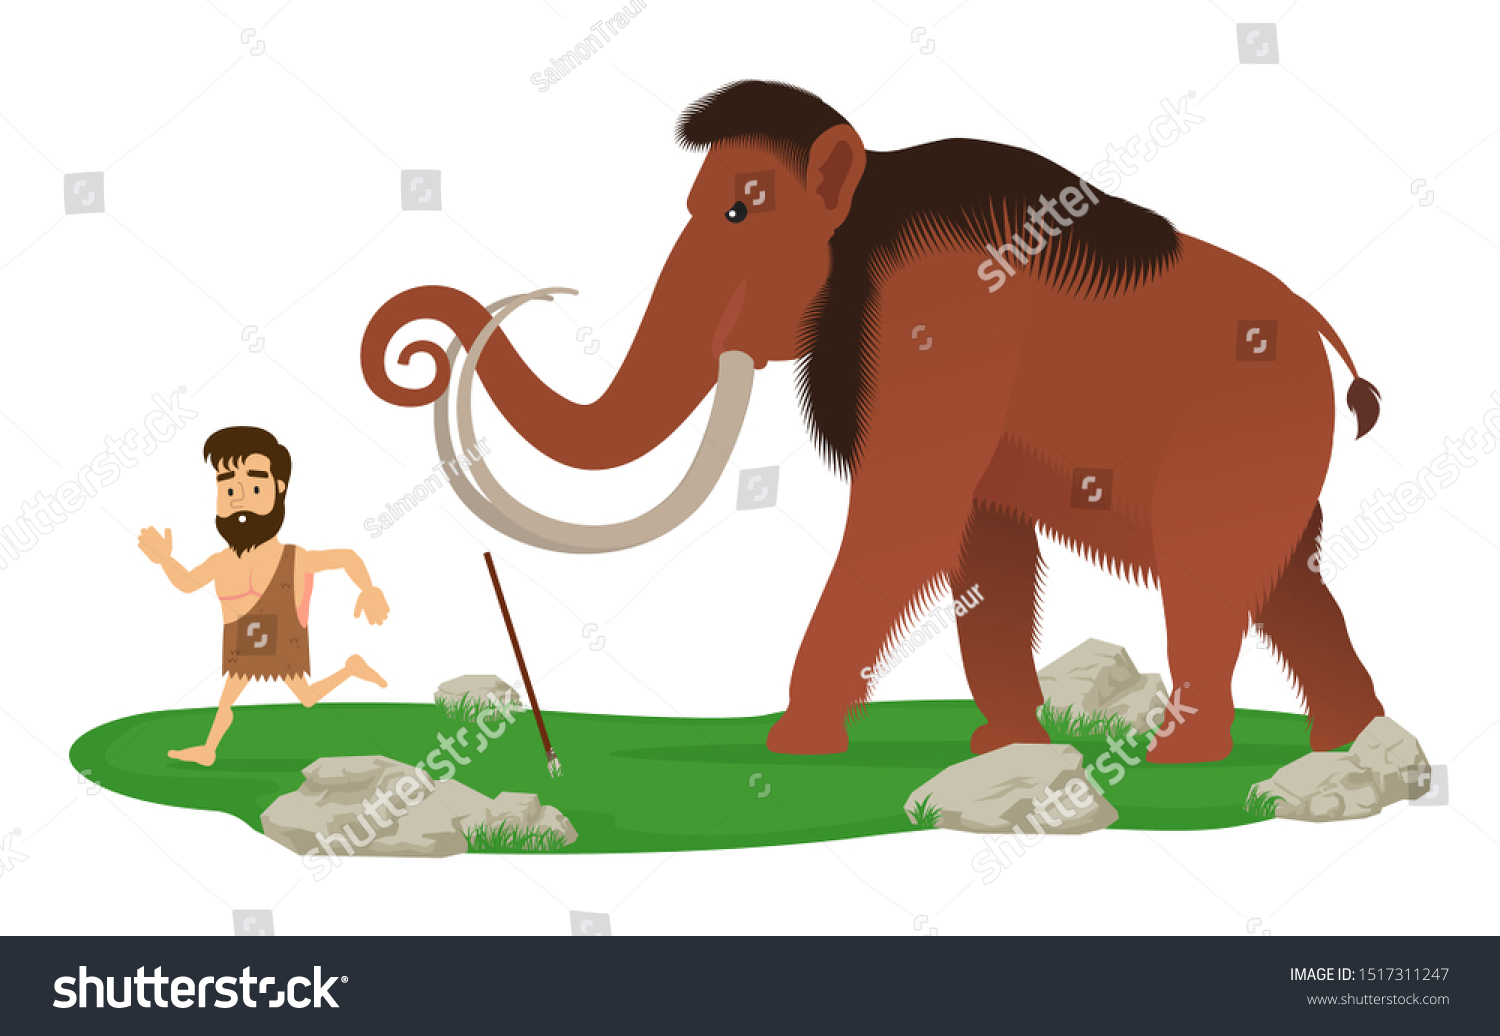 SVG of The prehistoric hunter runs away from the mammoth in a fright. Isolated on a white background. svg